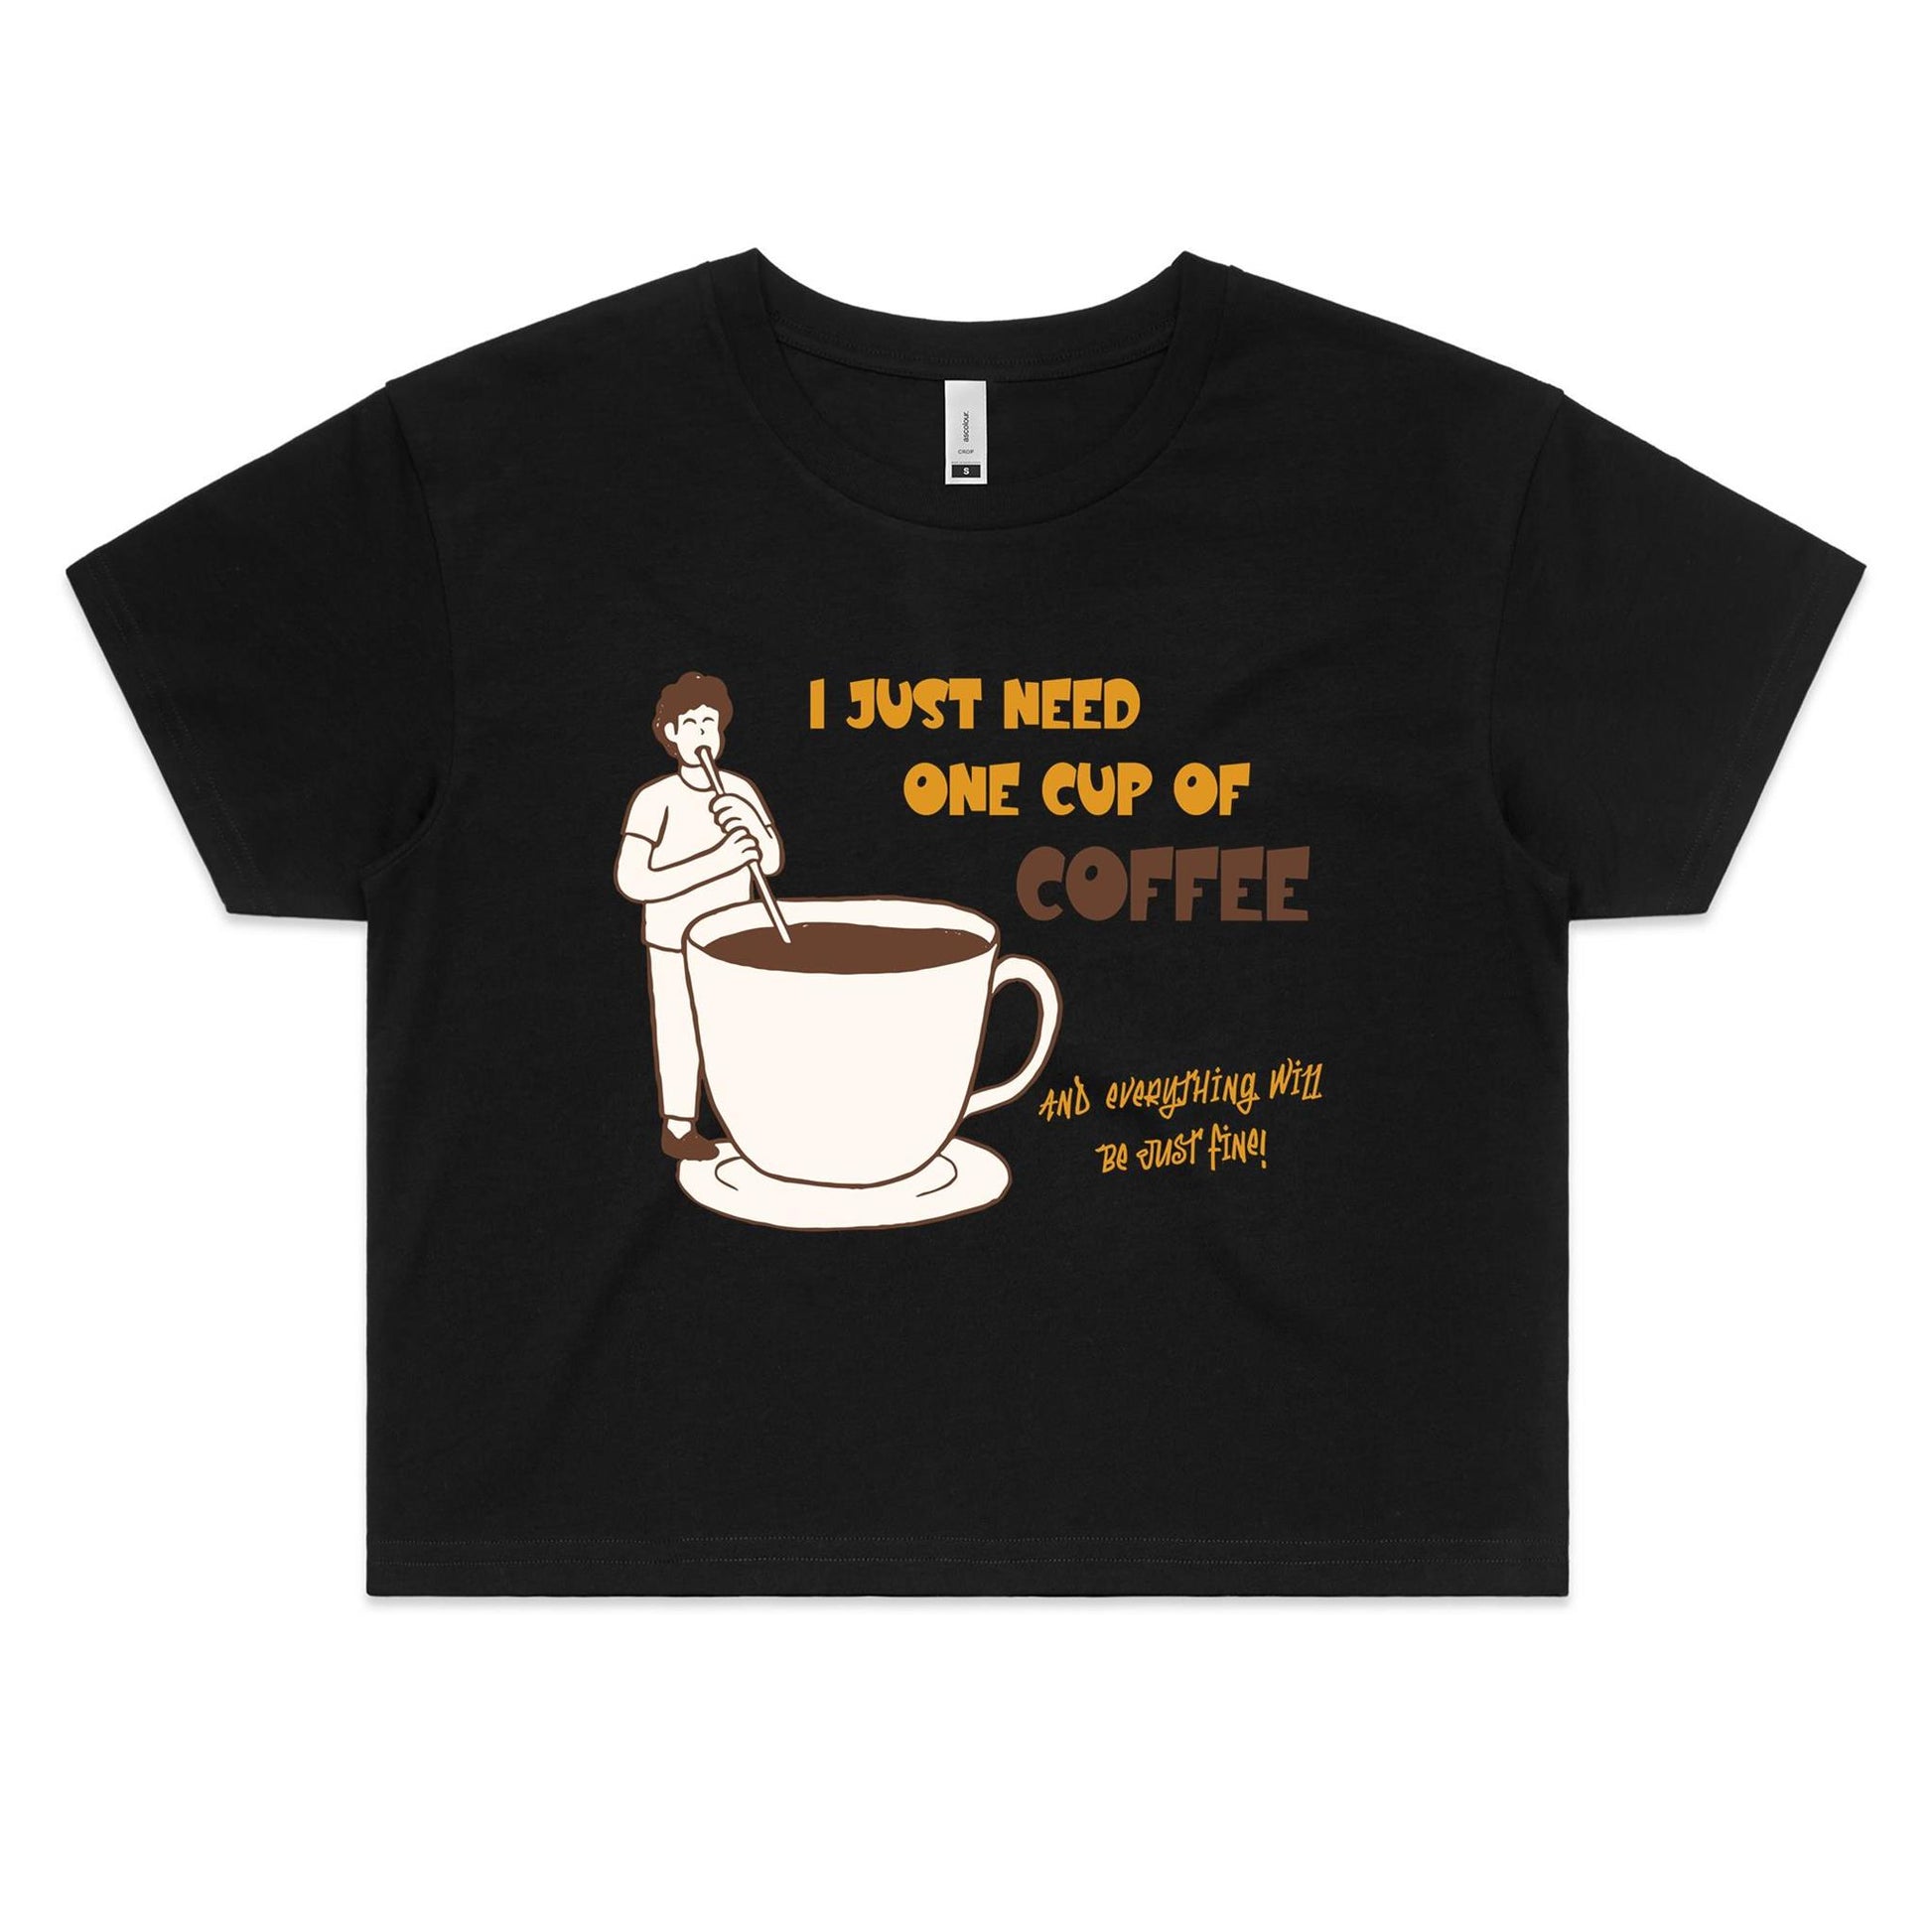 I Just Need One Cup Of Coffee And Everything Will Be Just Fine - Women's Crop Tee Black Womens Crop Top Coffee